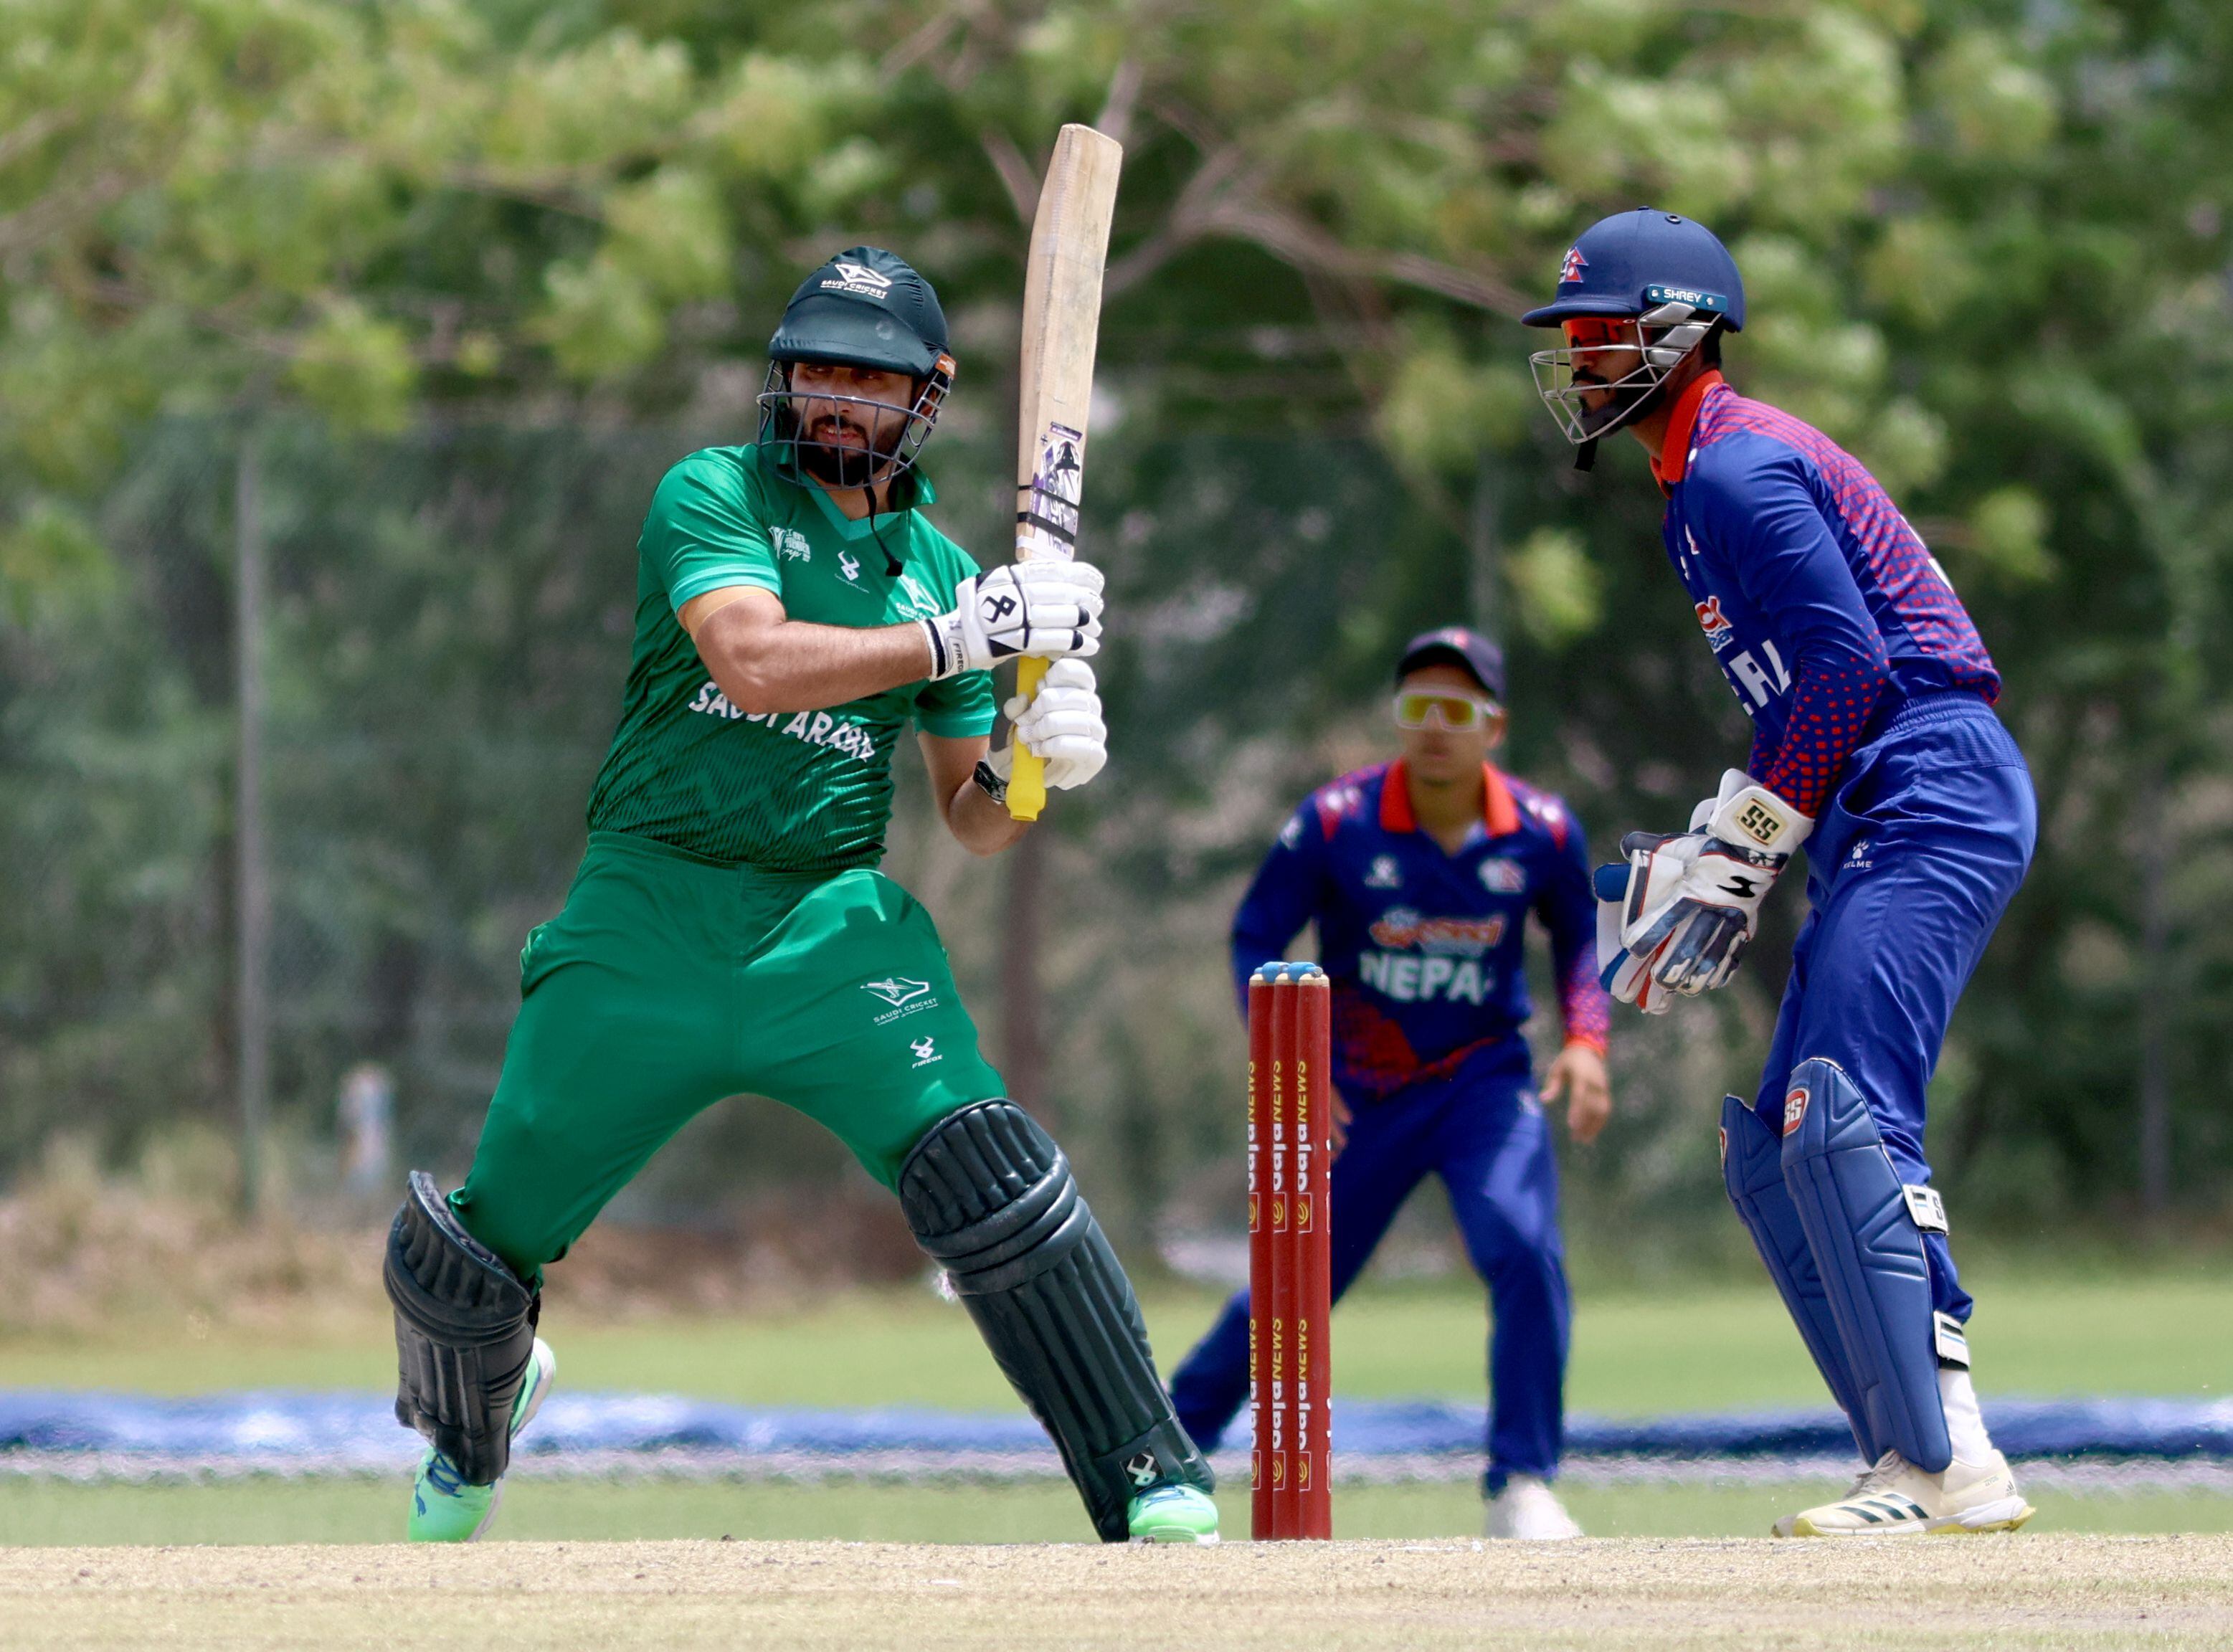 saudi arabia eye place at ‘centre of cricket in the gulf’ after promising display in oman